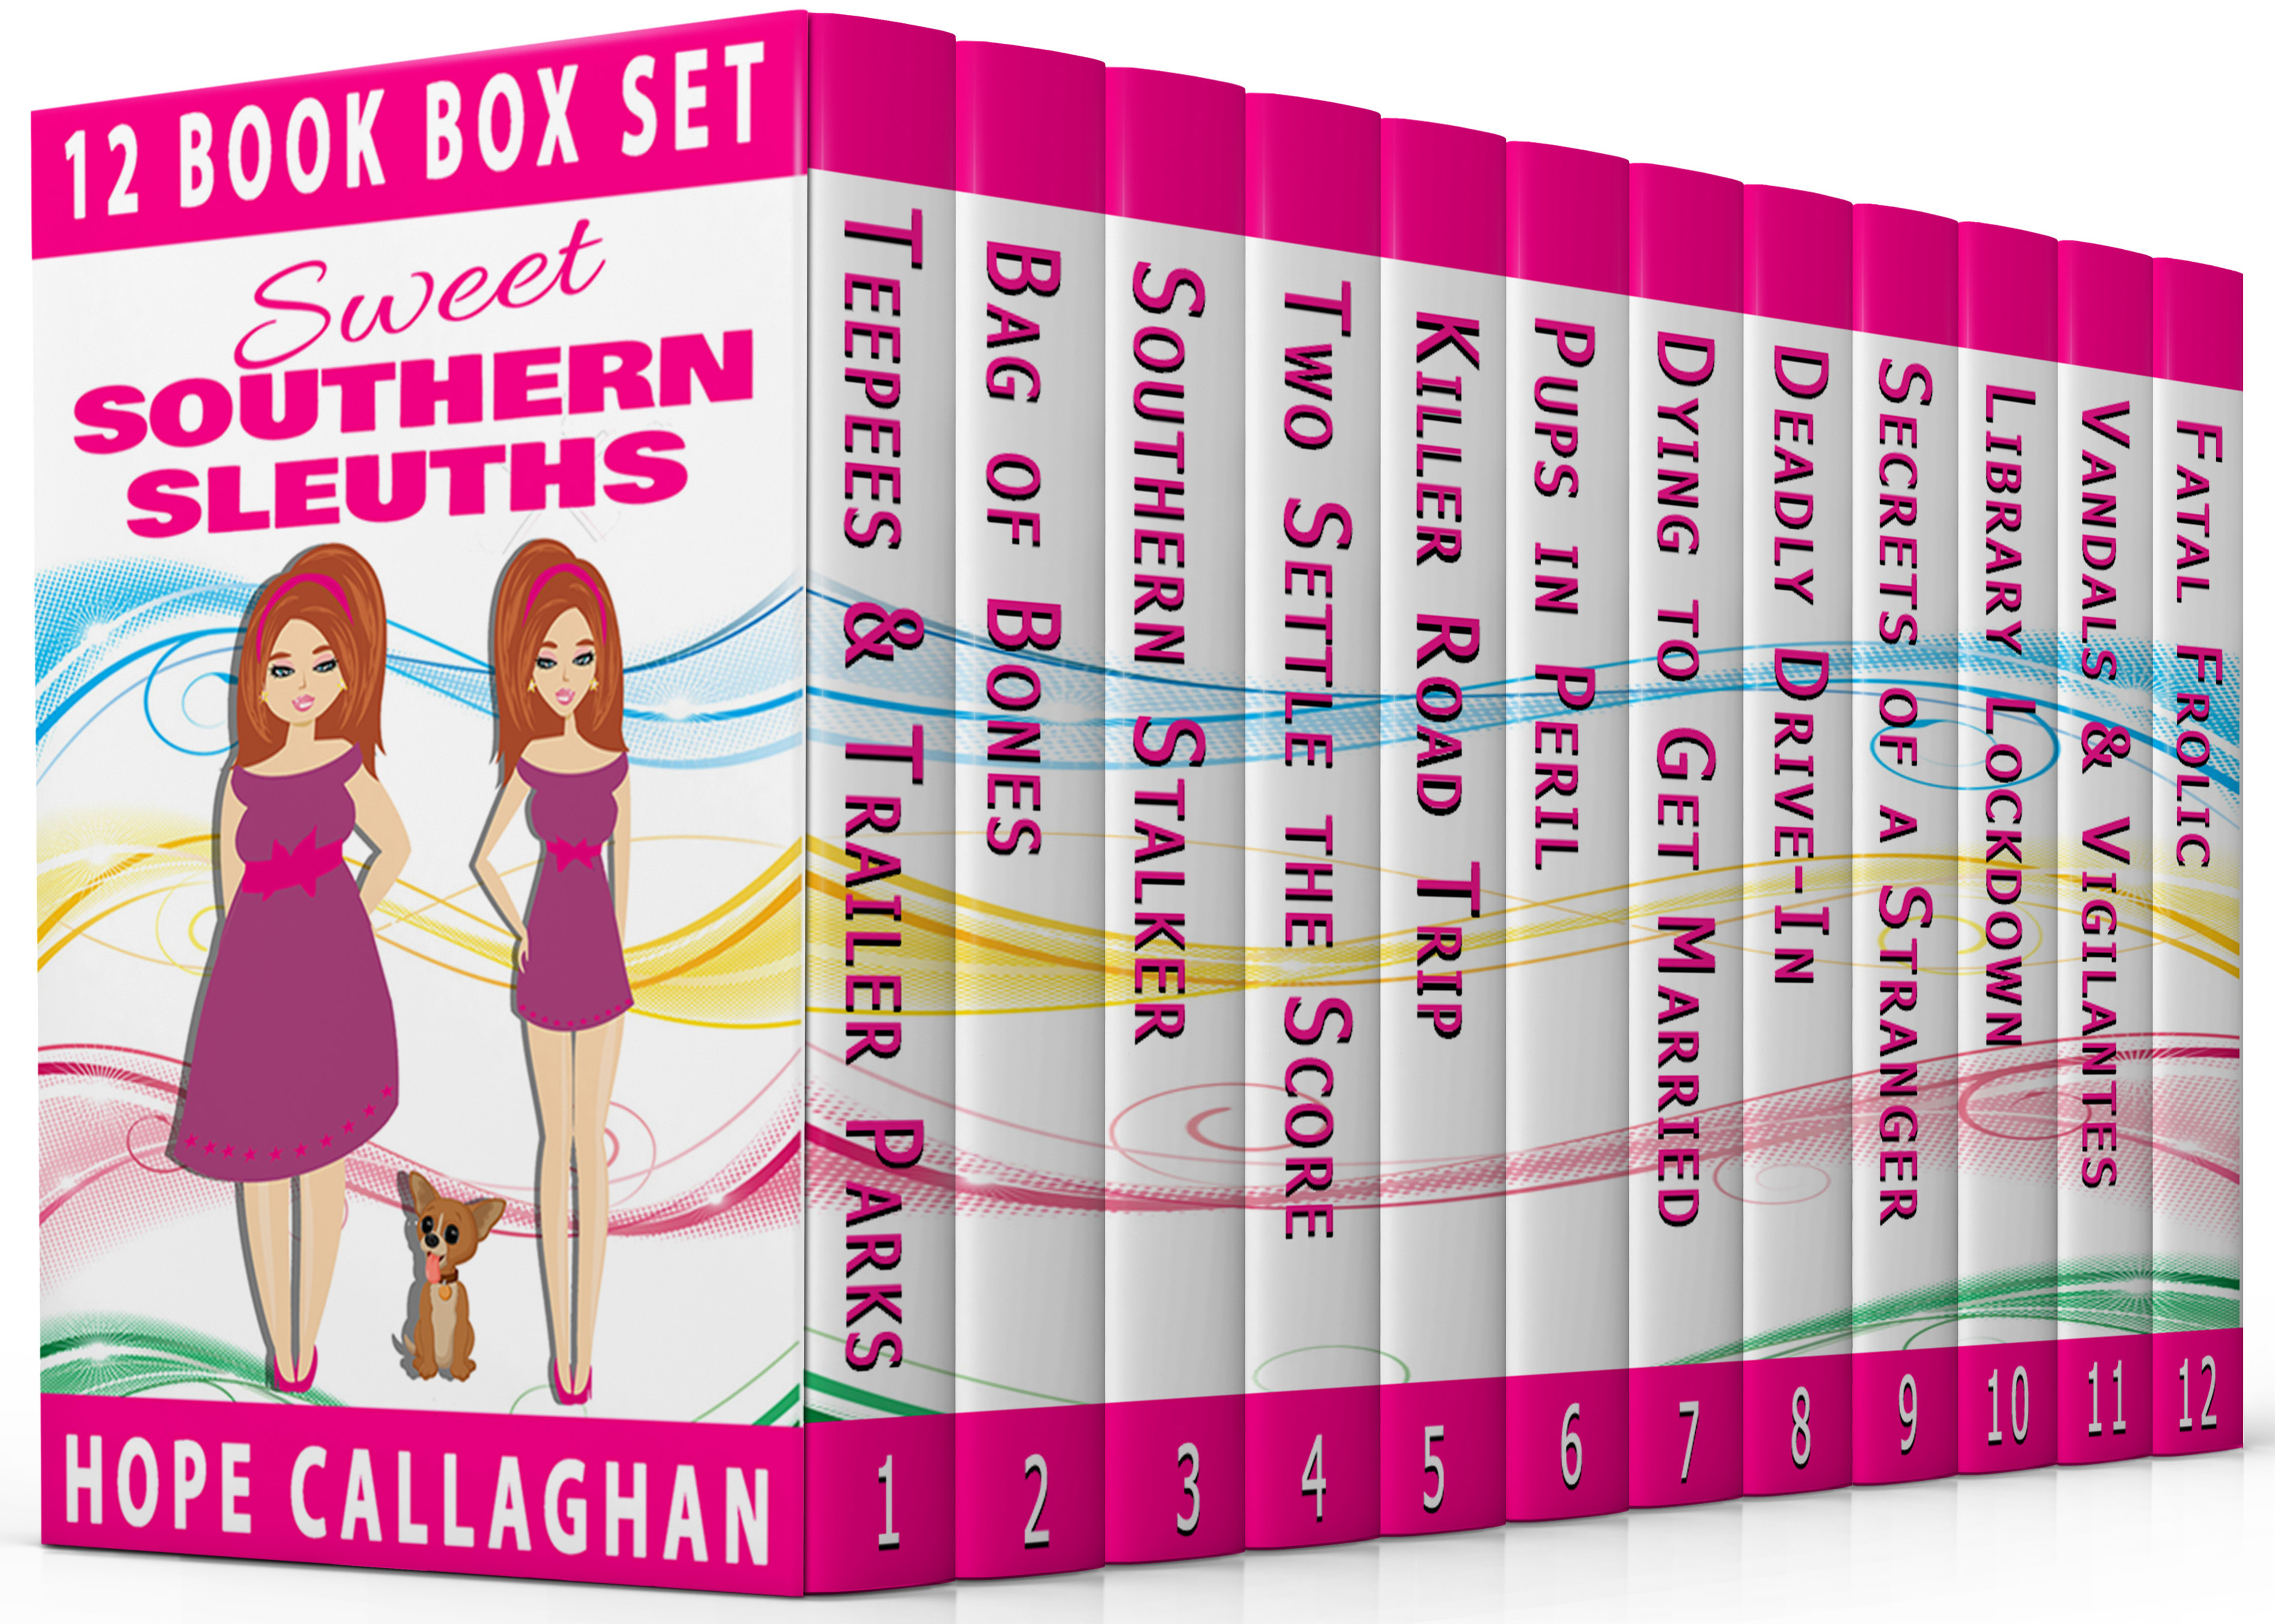 Get The Entire 12 Book Series For Just $23.99 $5.99!